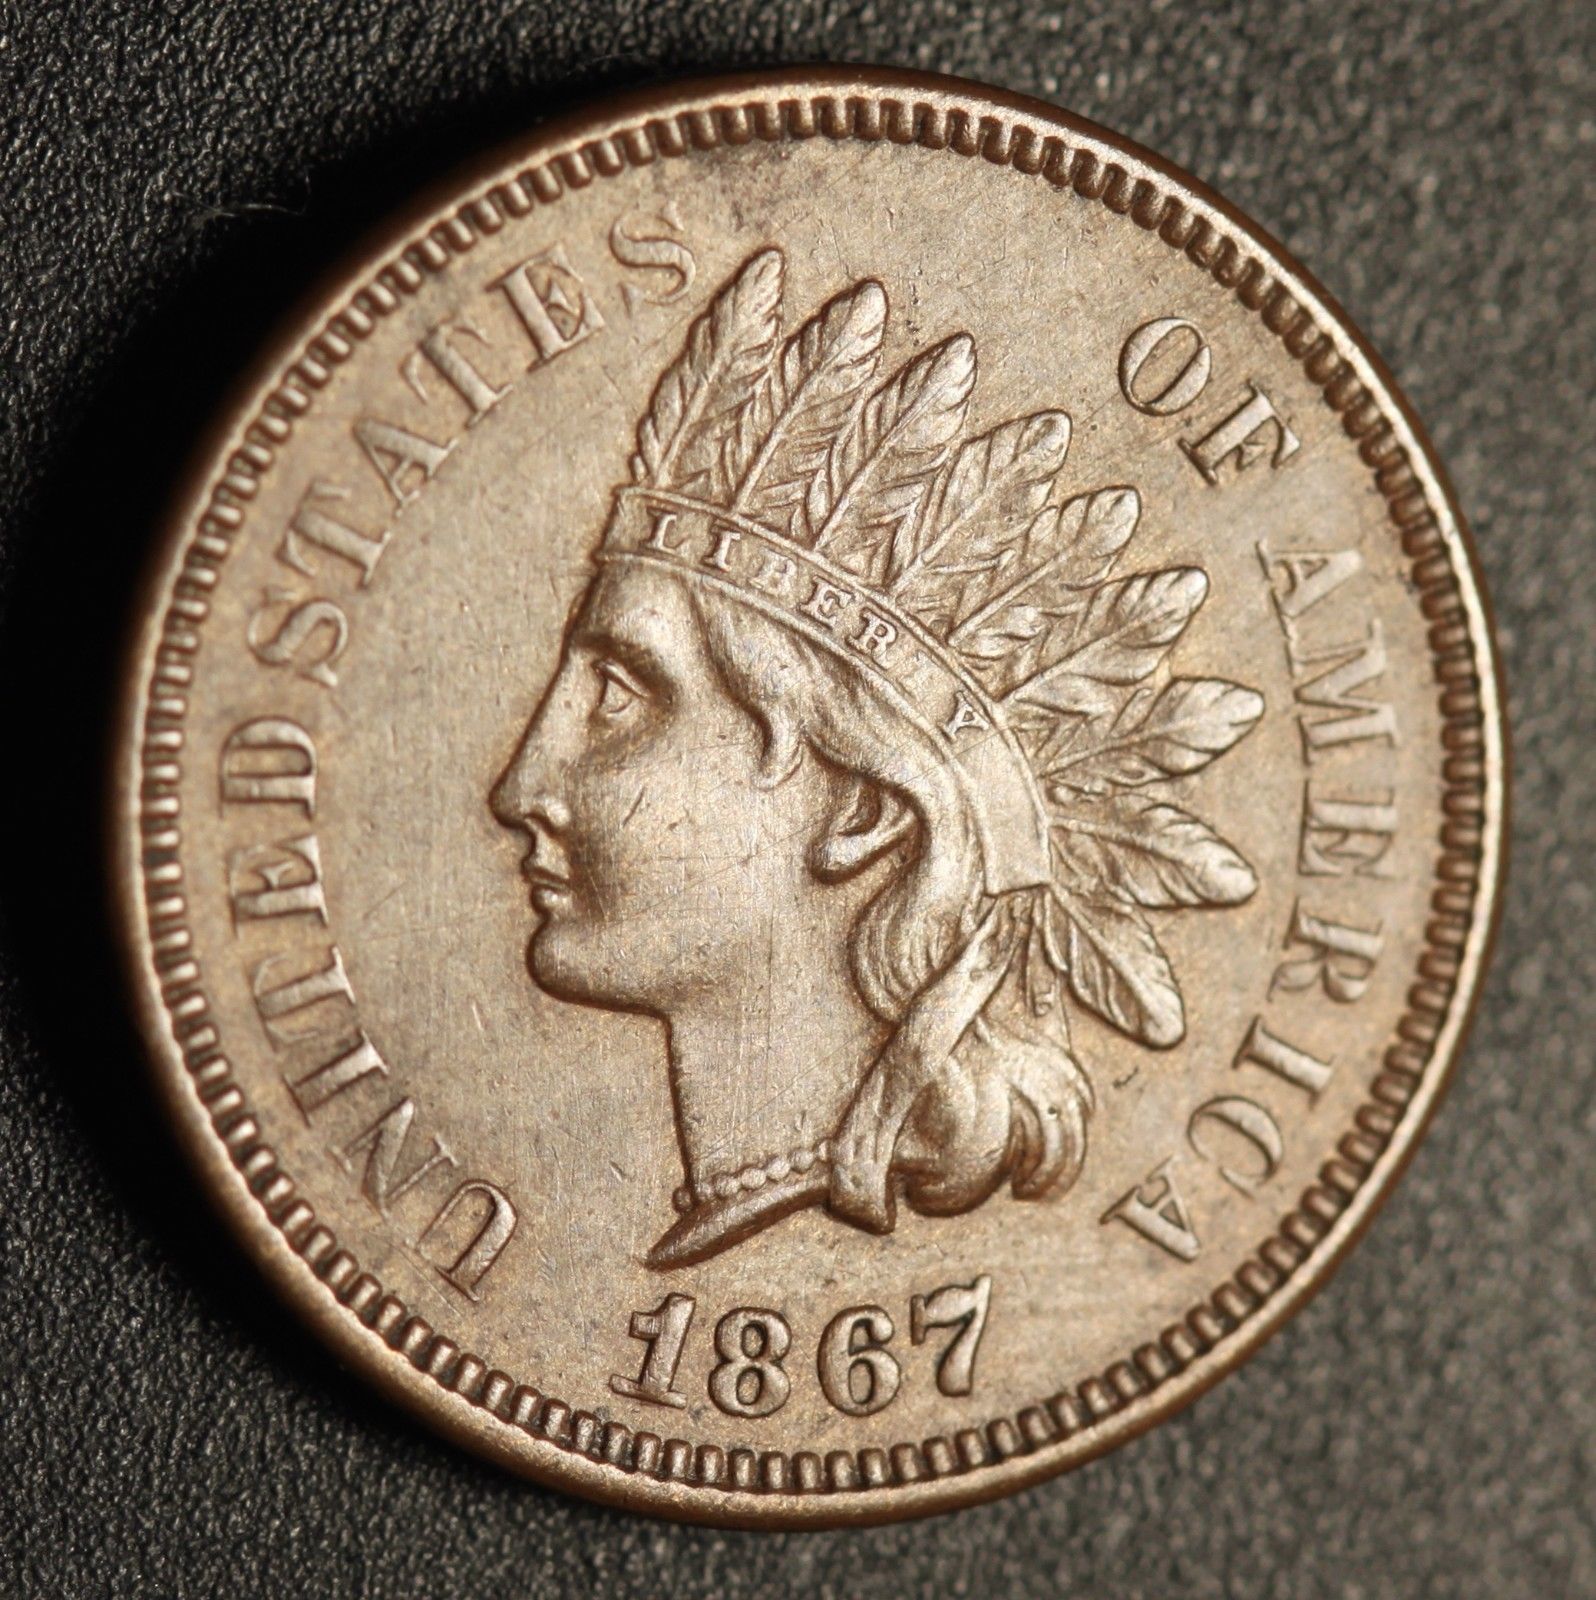 1867 RPD-002 - Indian Head Penny - Photo by Ed Nathanson